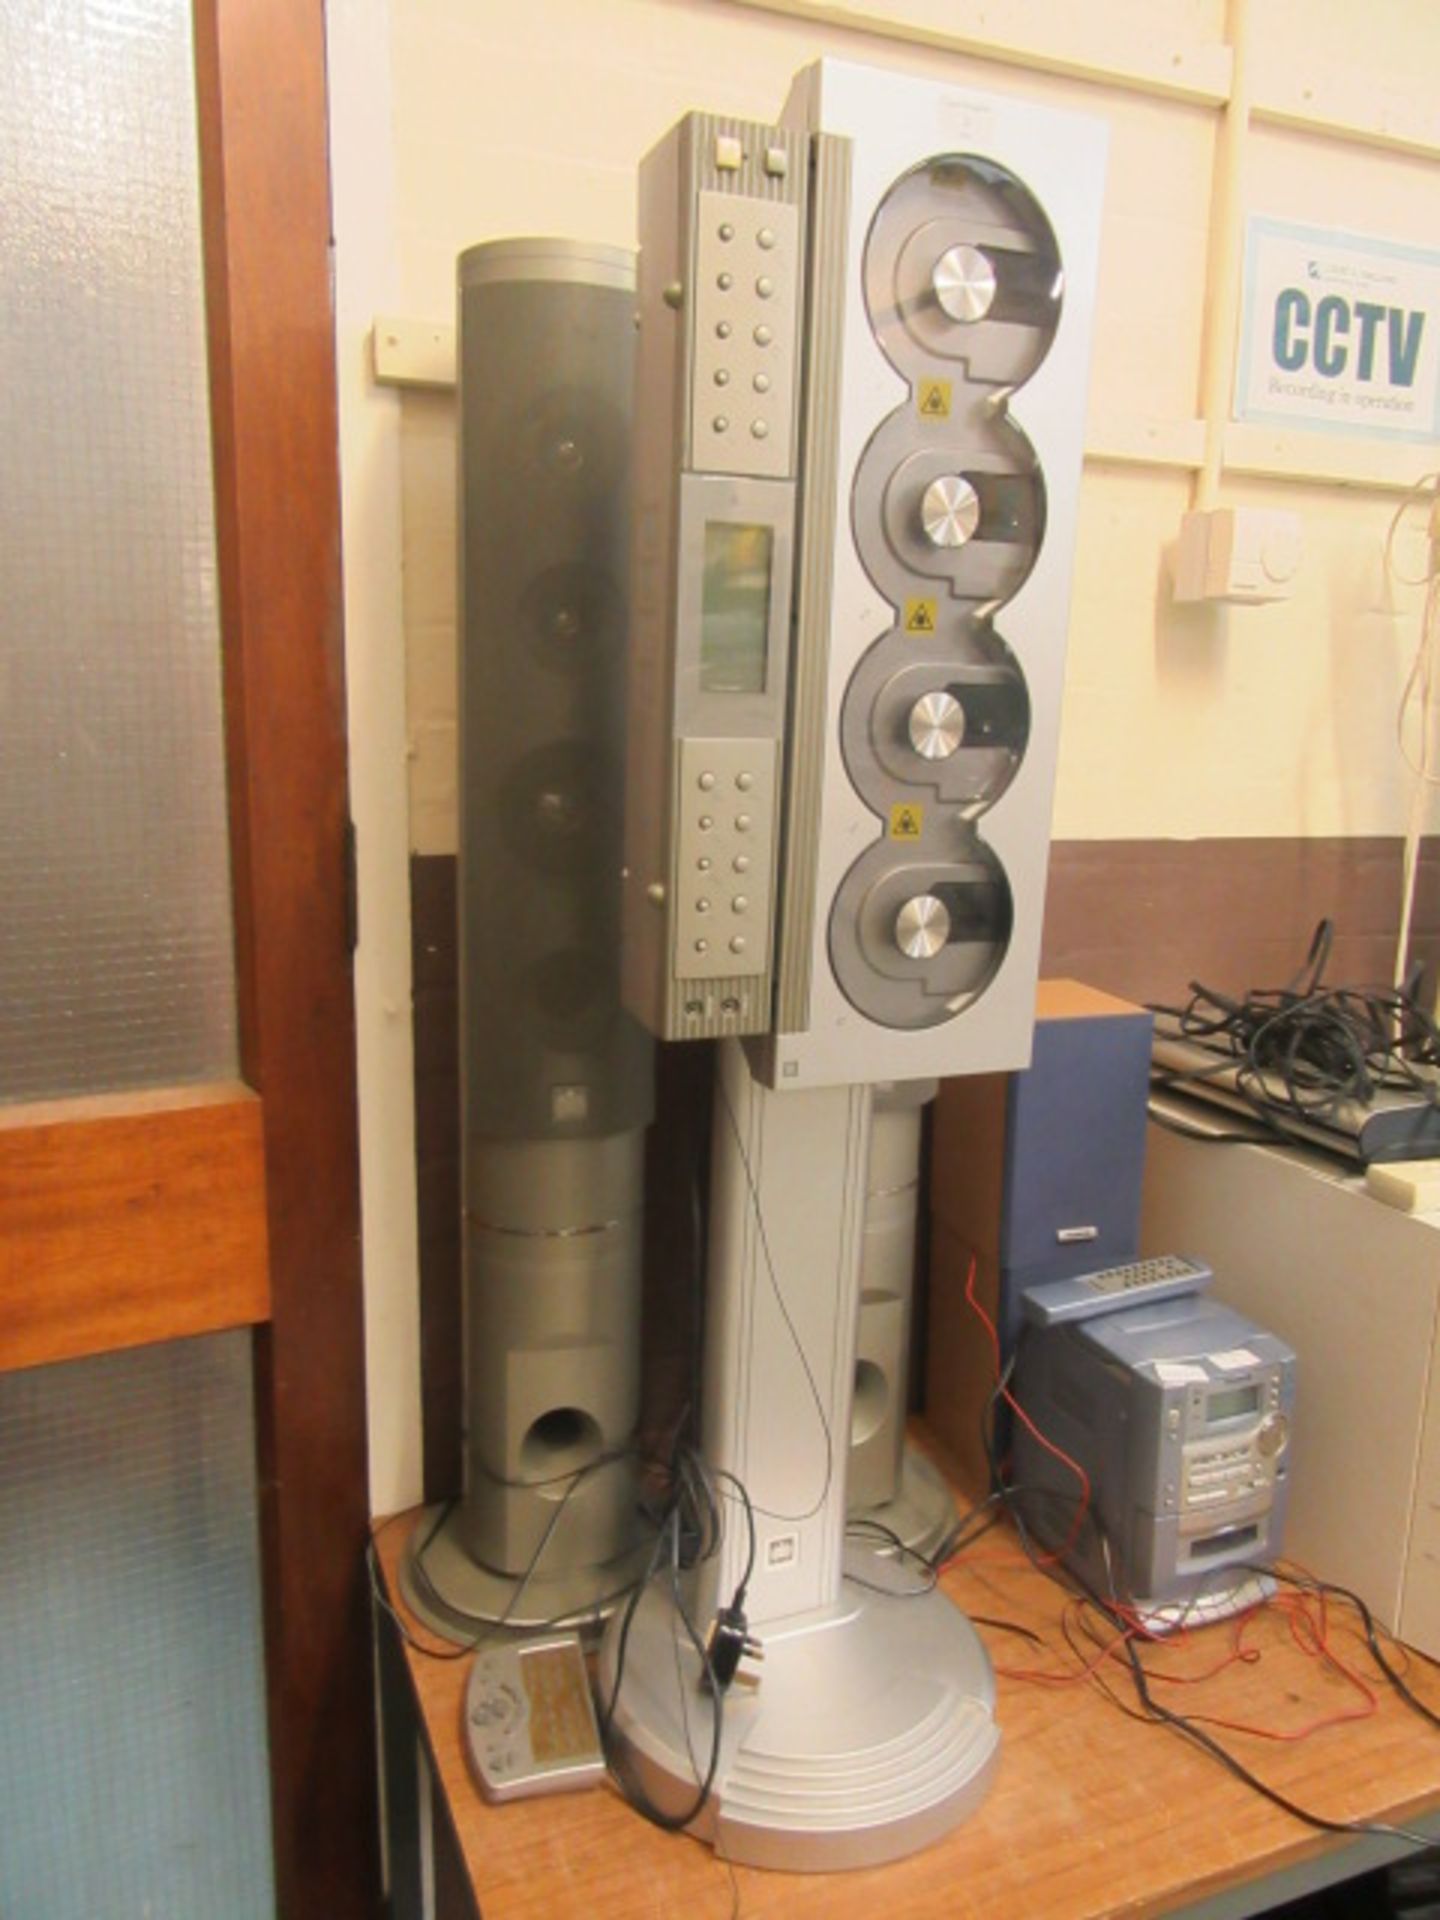 A Ministry Of Sound multi CD player along with speakers and remote